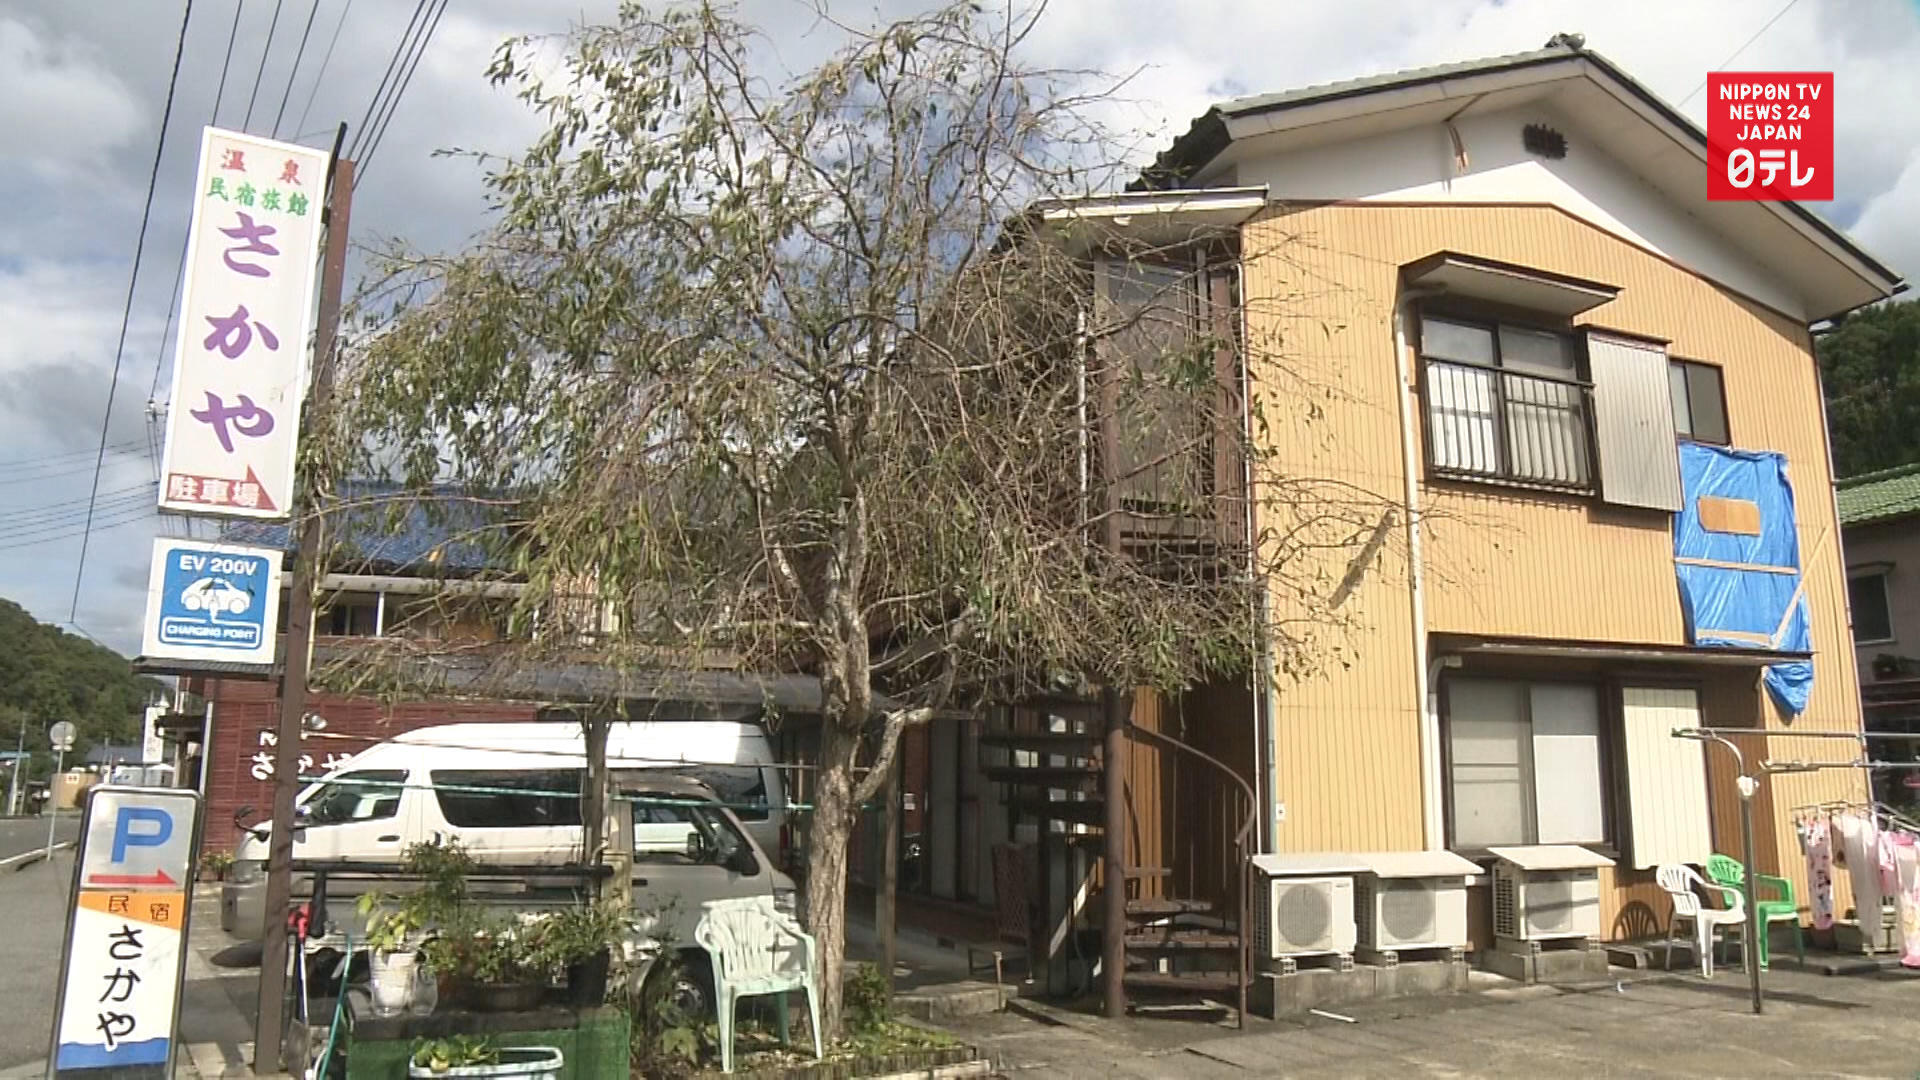 Power restored in Chiba but tourism remains affected